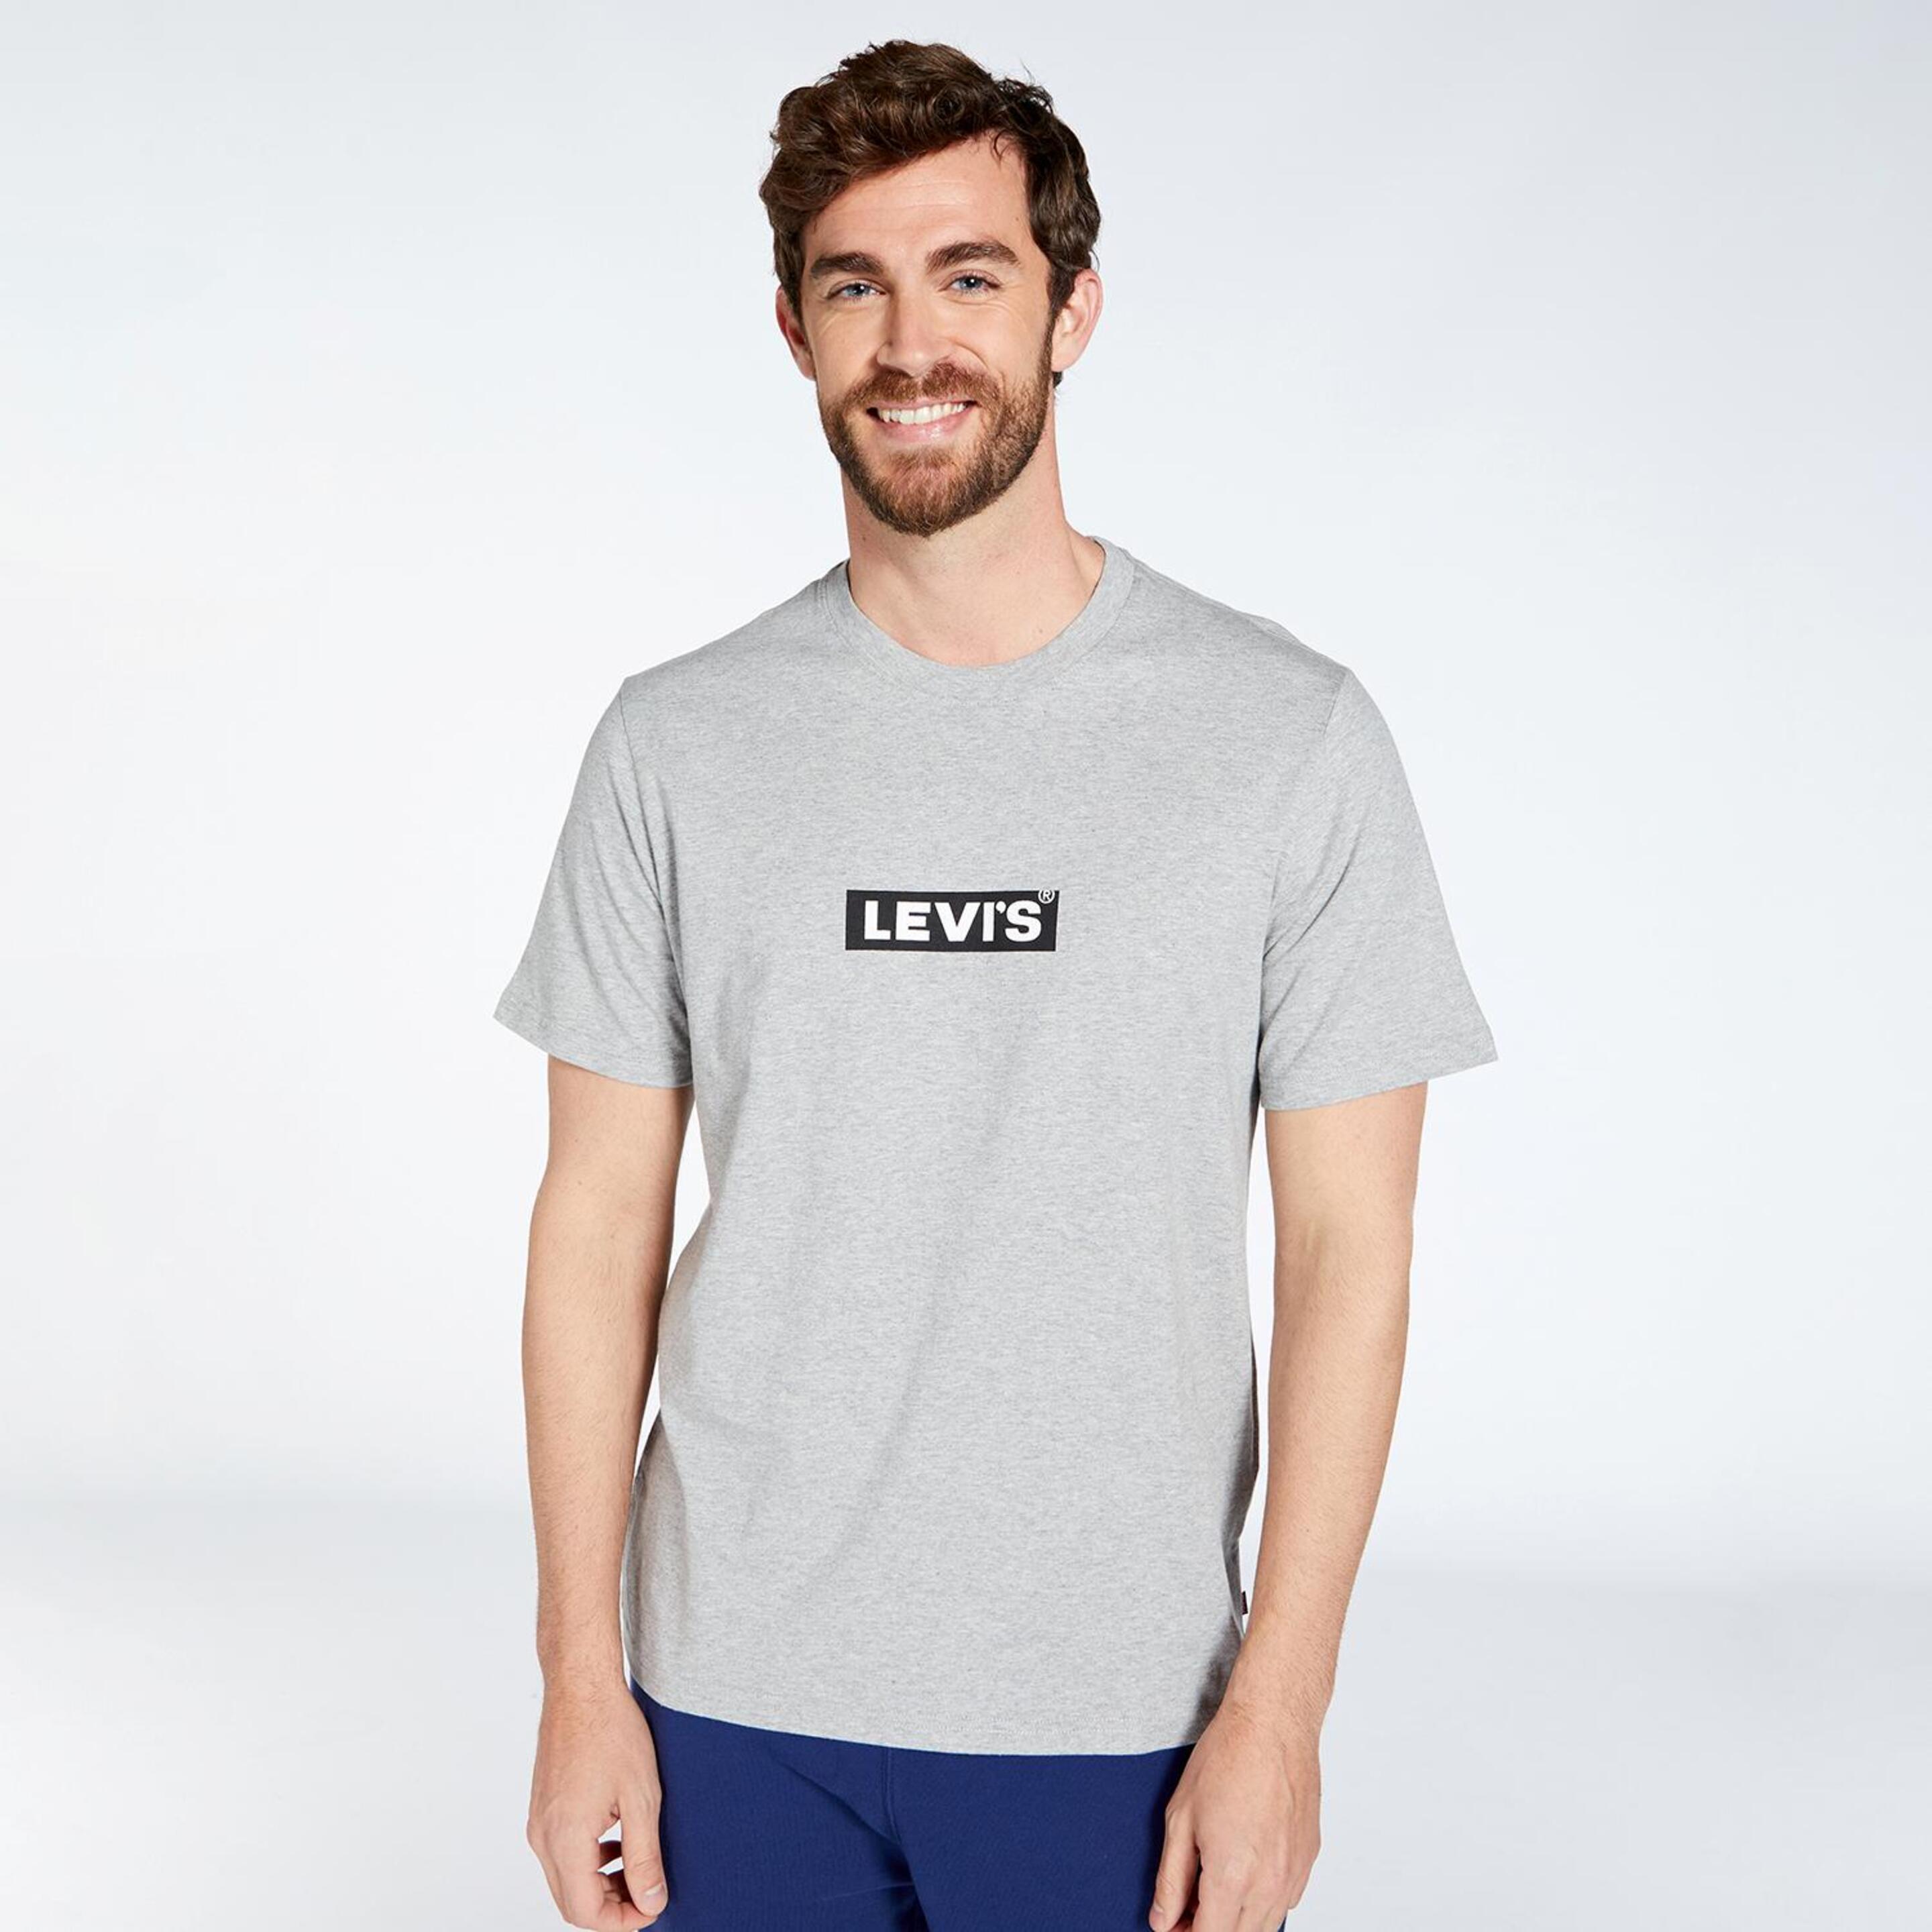 Levi's Relaxed - gris - Camiseta Hombre